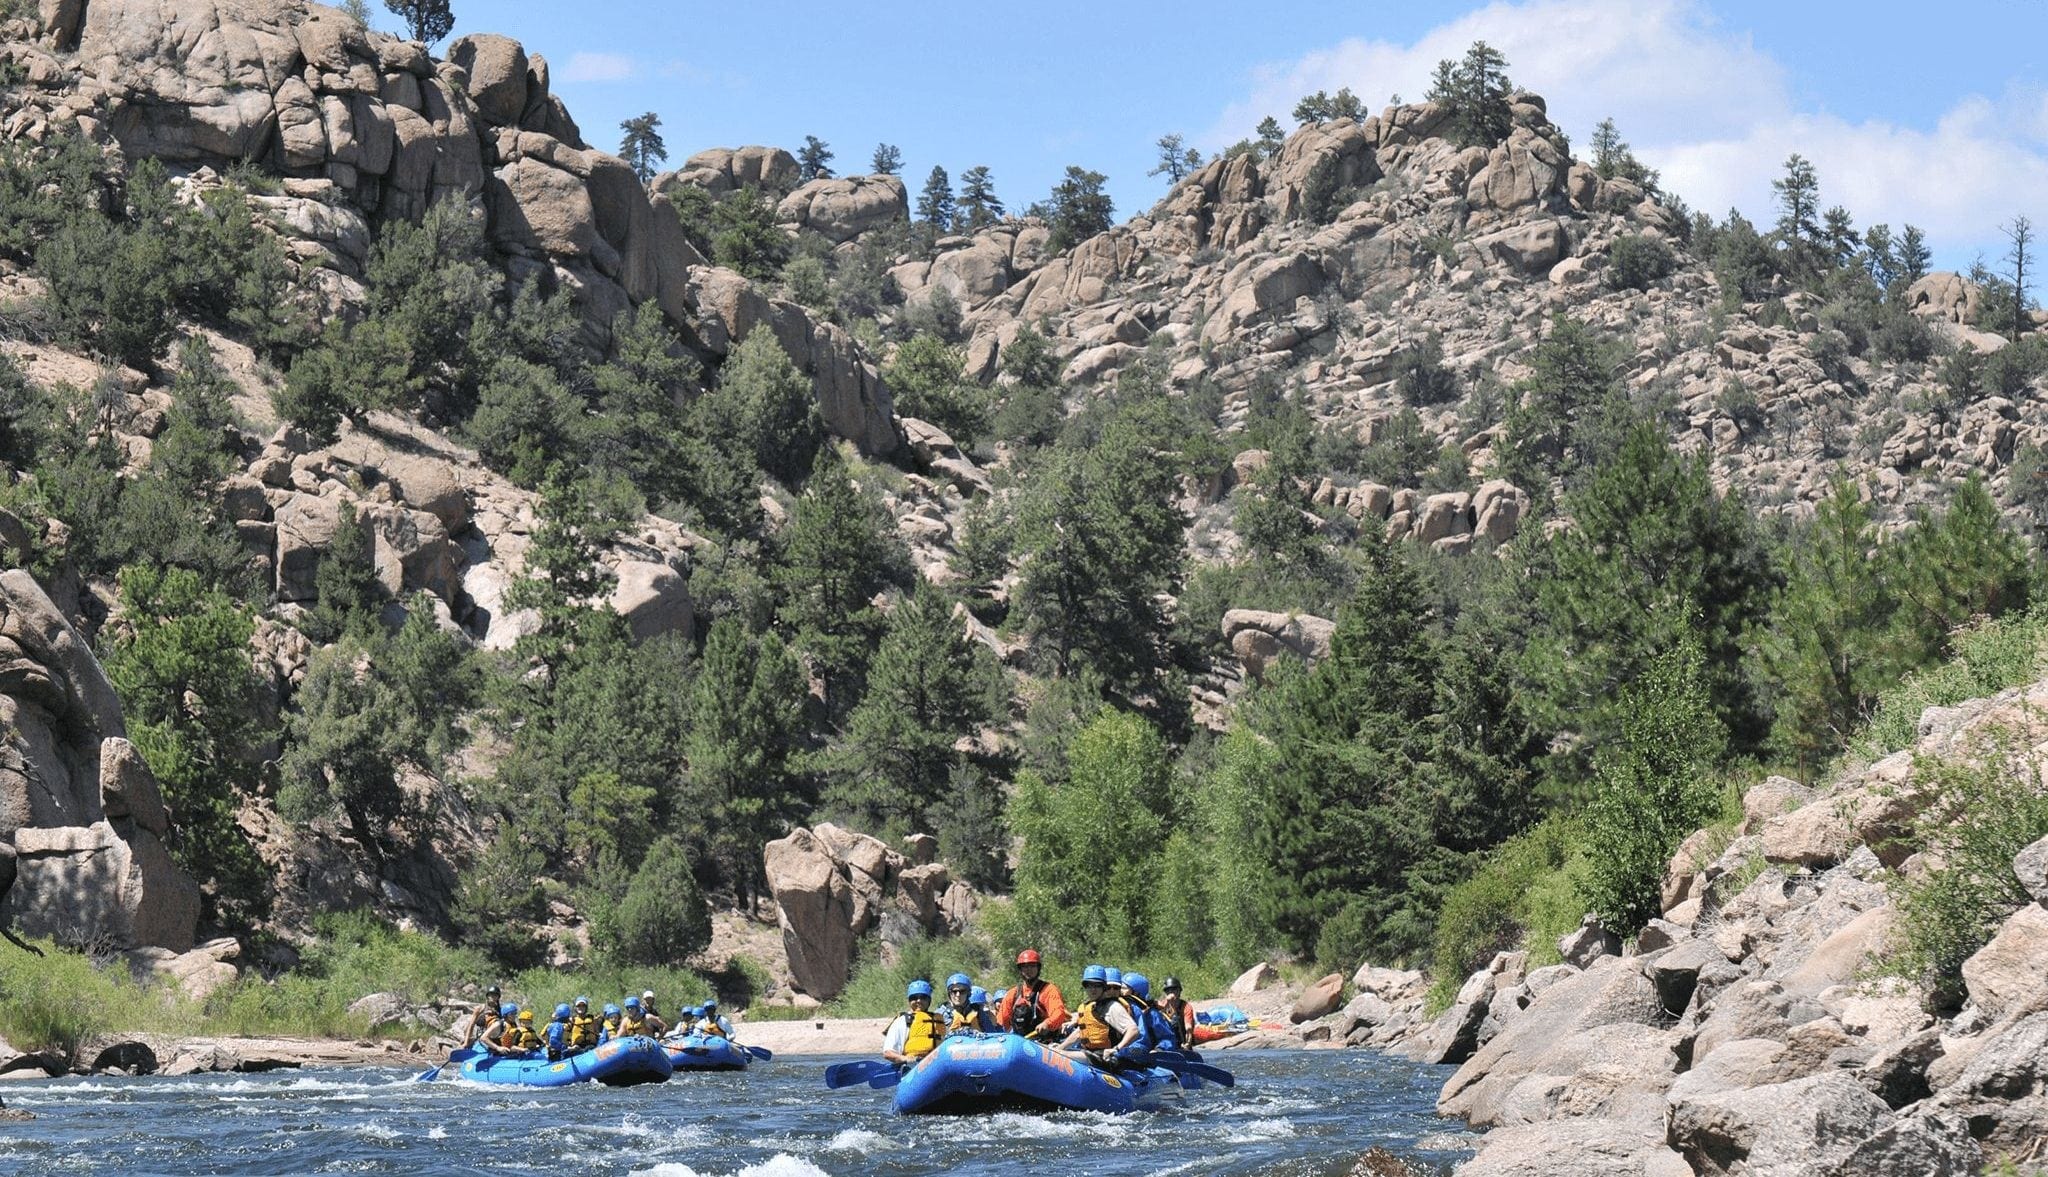 Summer group rafting in the Blue River in Breckenridge